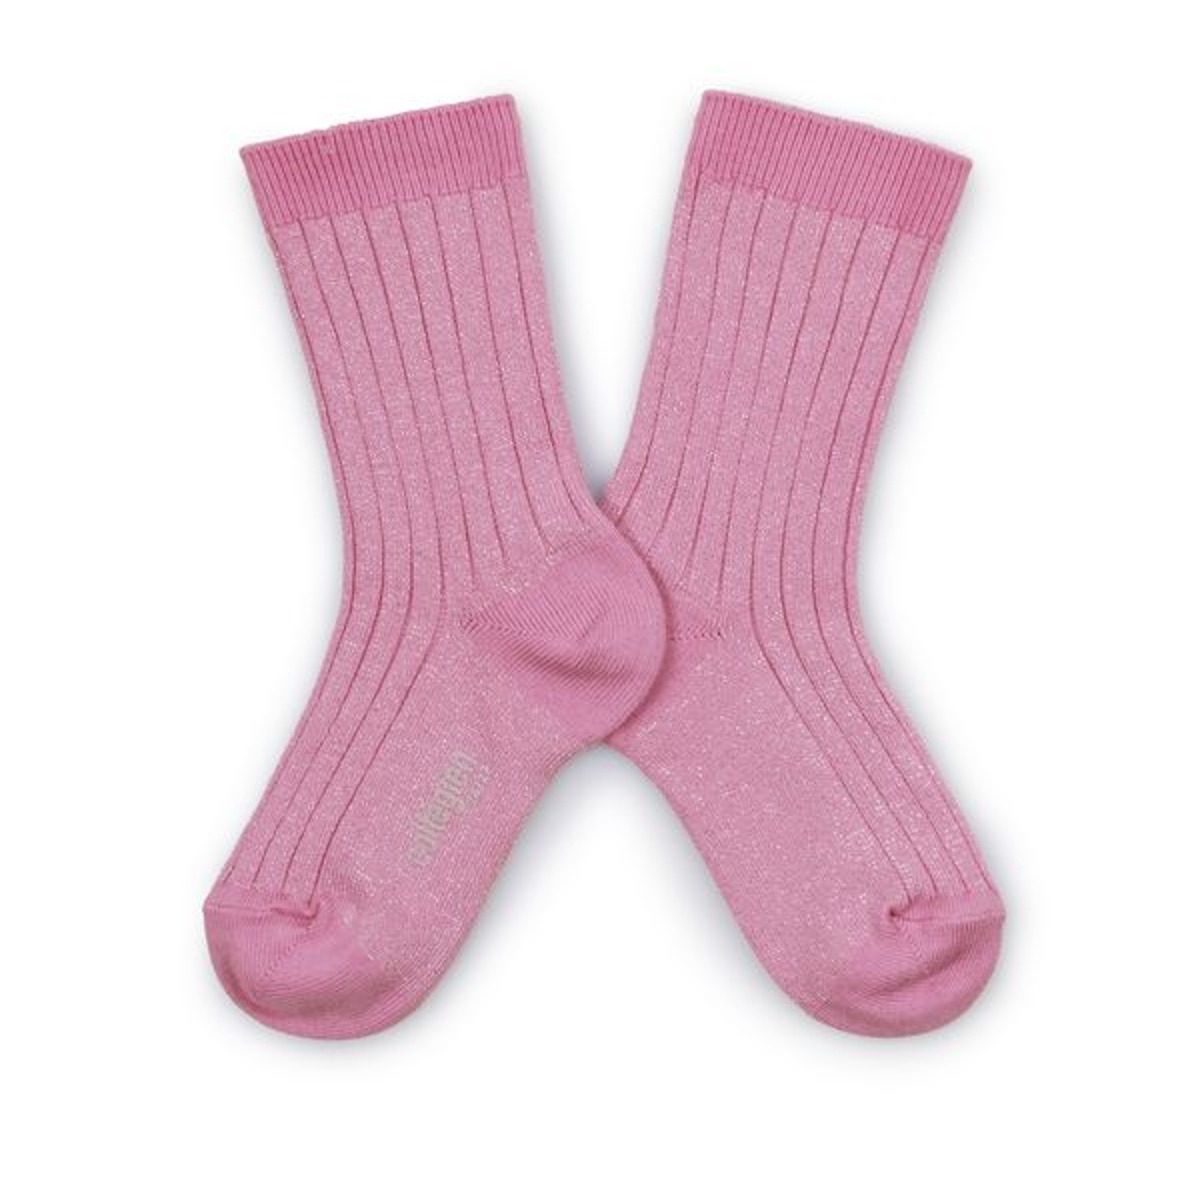 Victoire - Glitter Ribbed Crew Socks - Candy pink #600